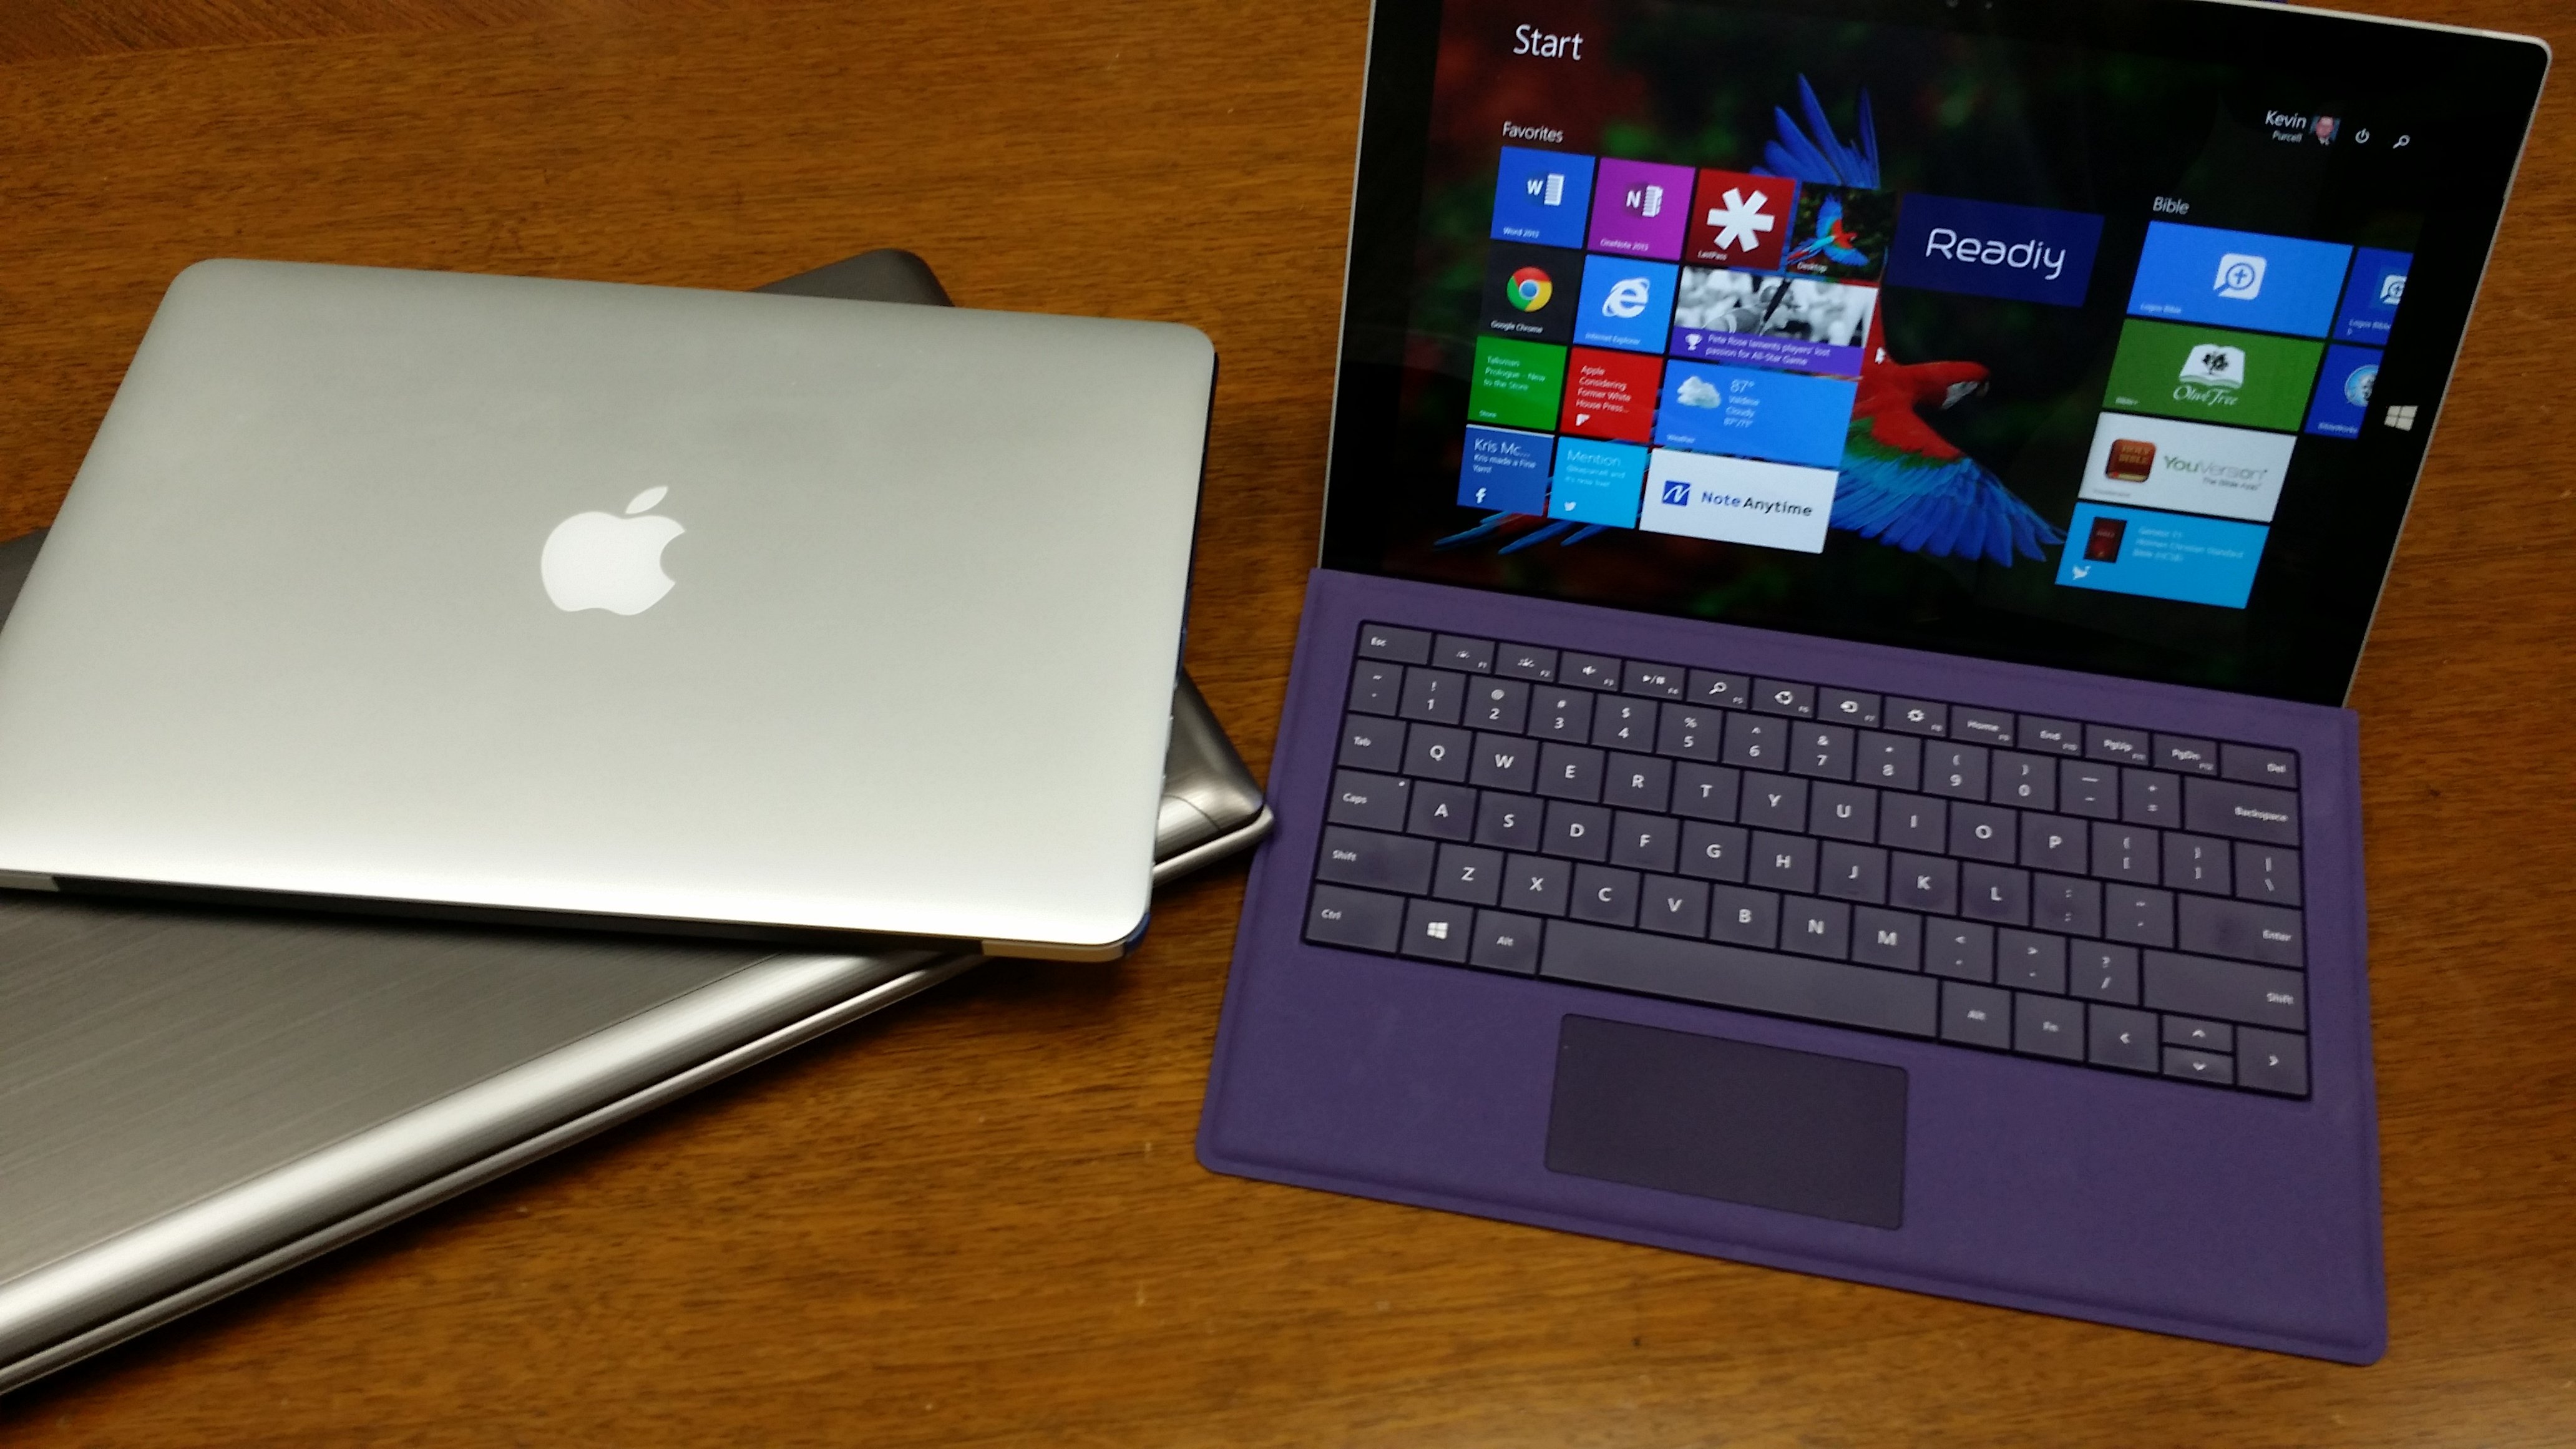 microsoft surface pro 3 and two other laptops